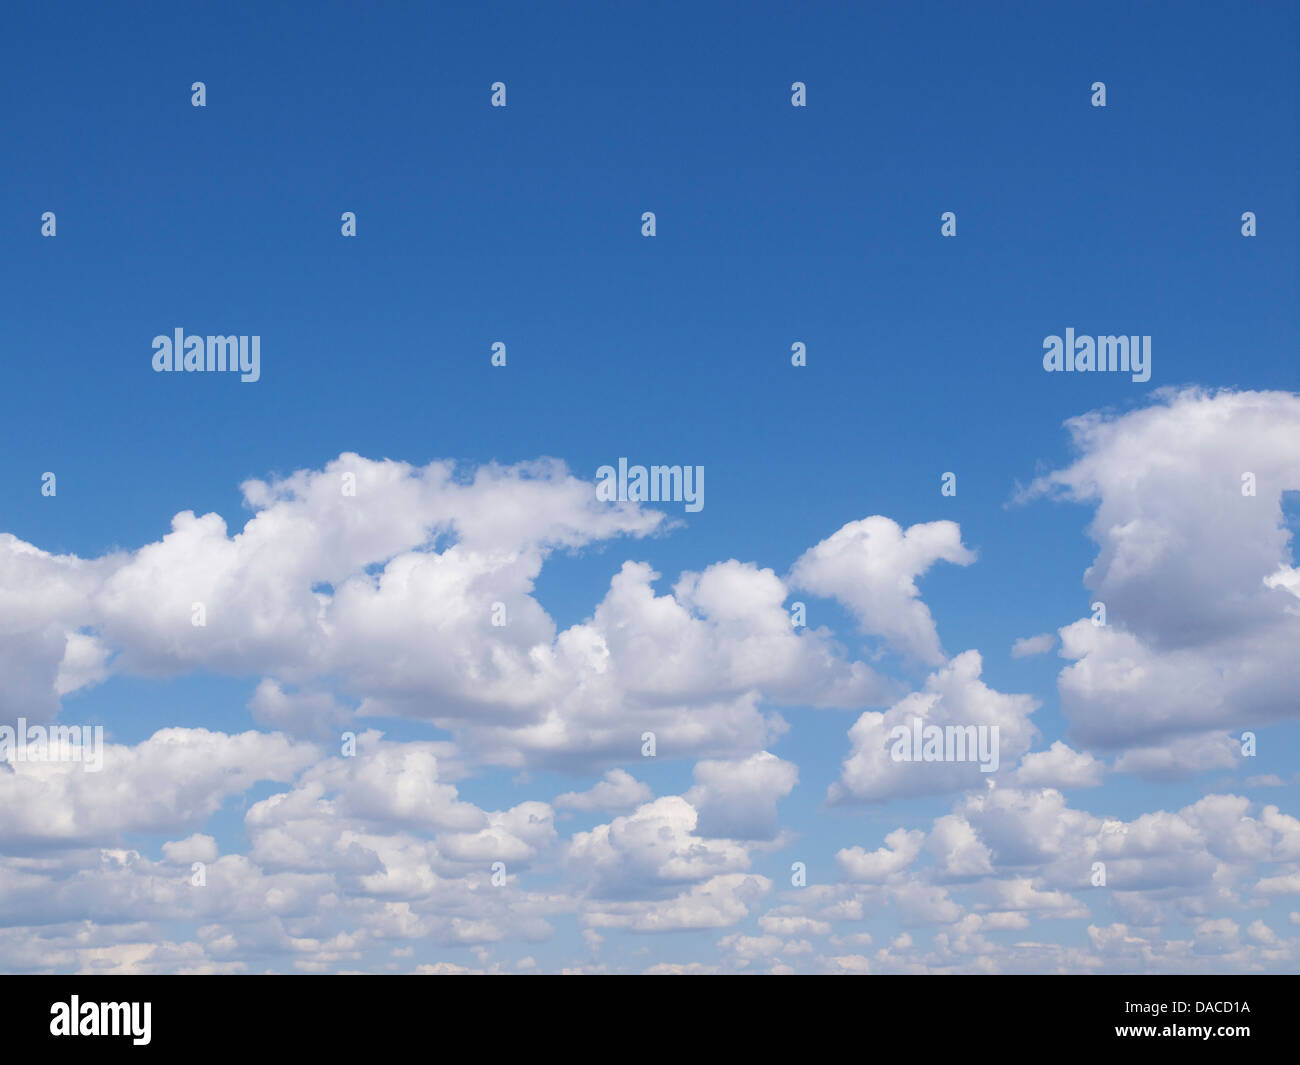 Blue sky with nice clouds in the bottom half of the image photographed in the Algarve, Portugal Stock Photo